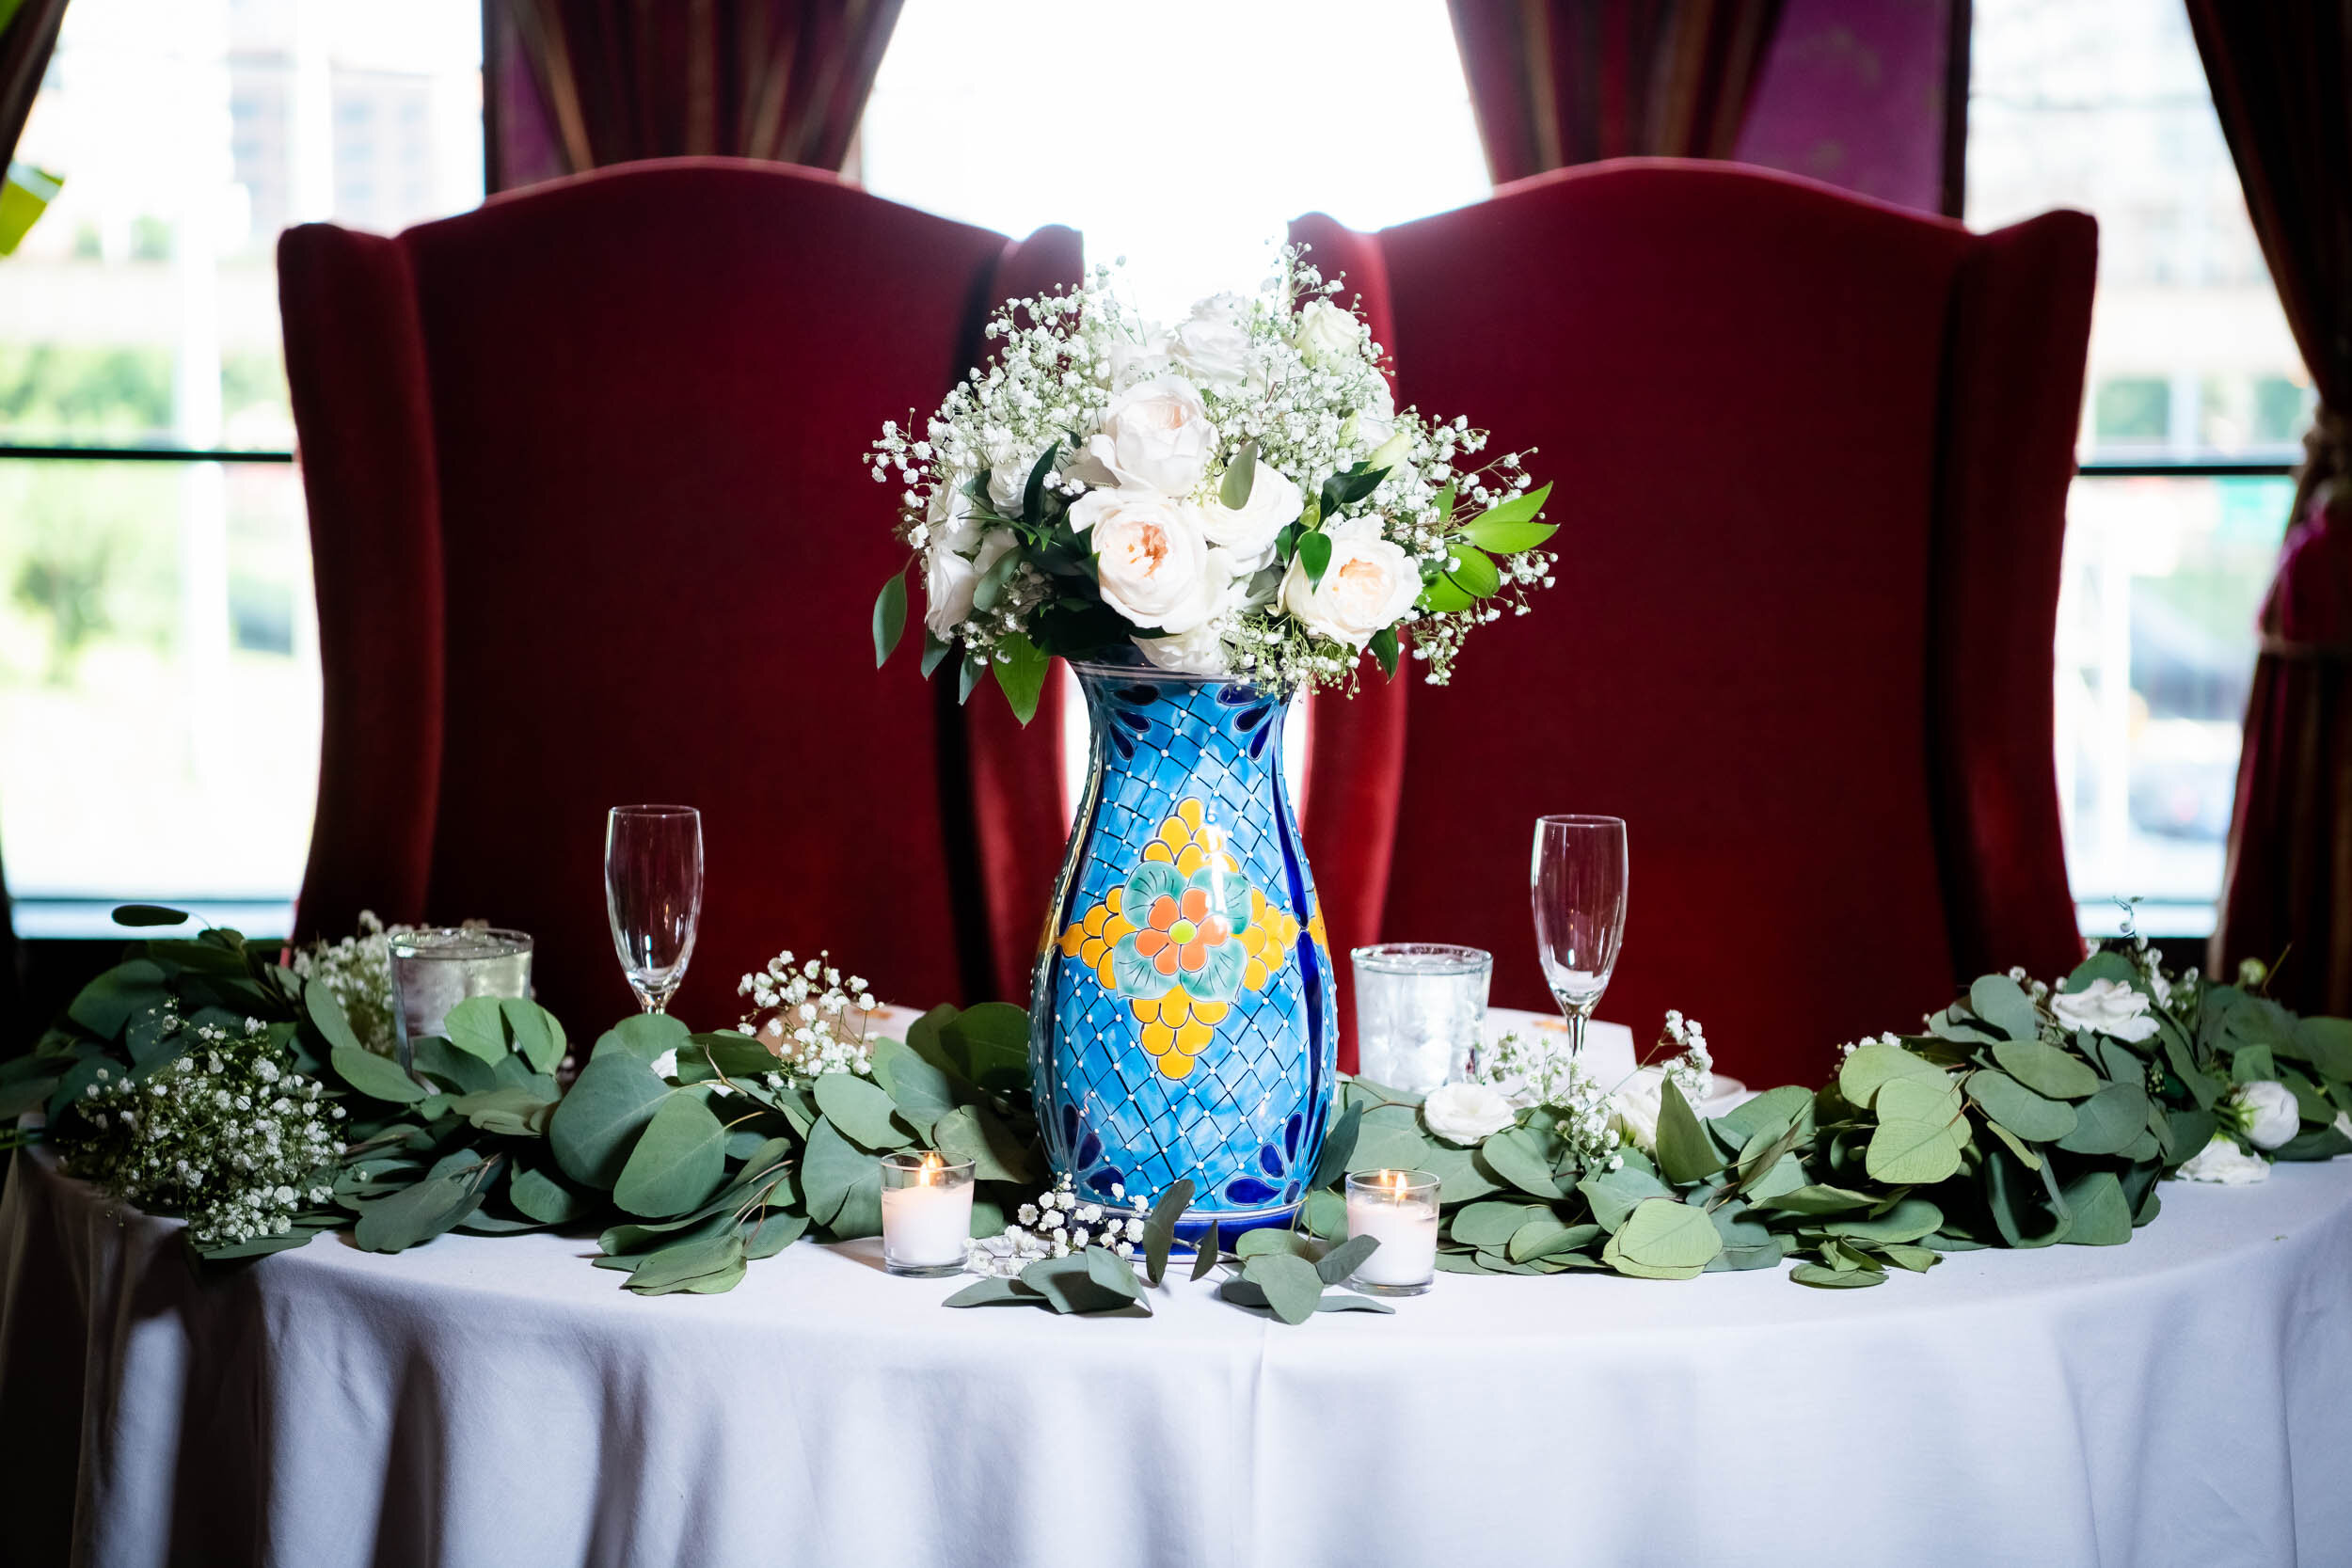 Wedding sweetheart table decor: Carnivale Chicago Wedding captured by J. Brown Photography